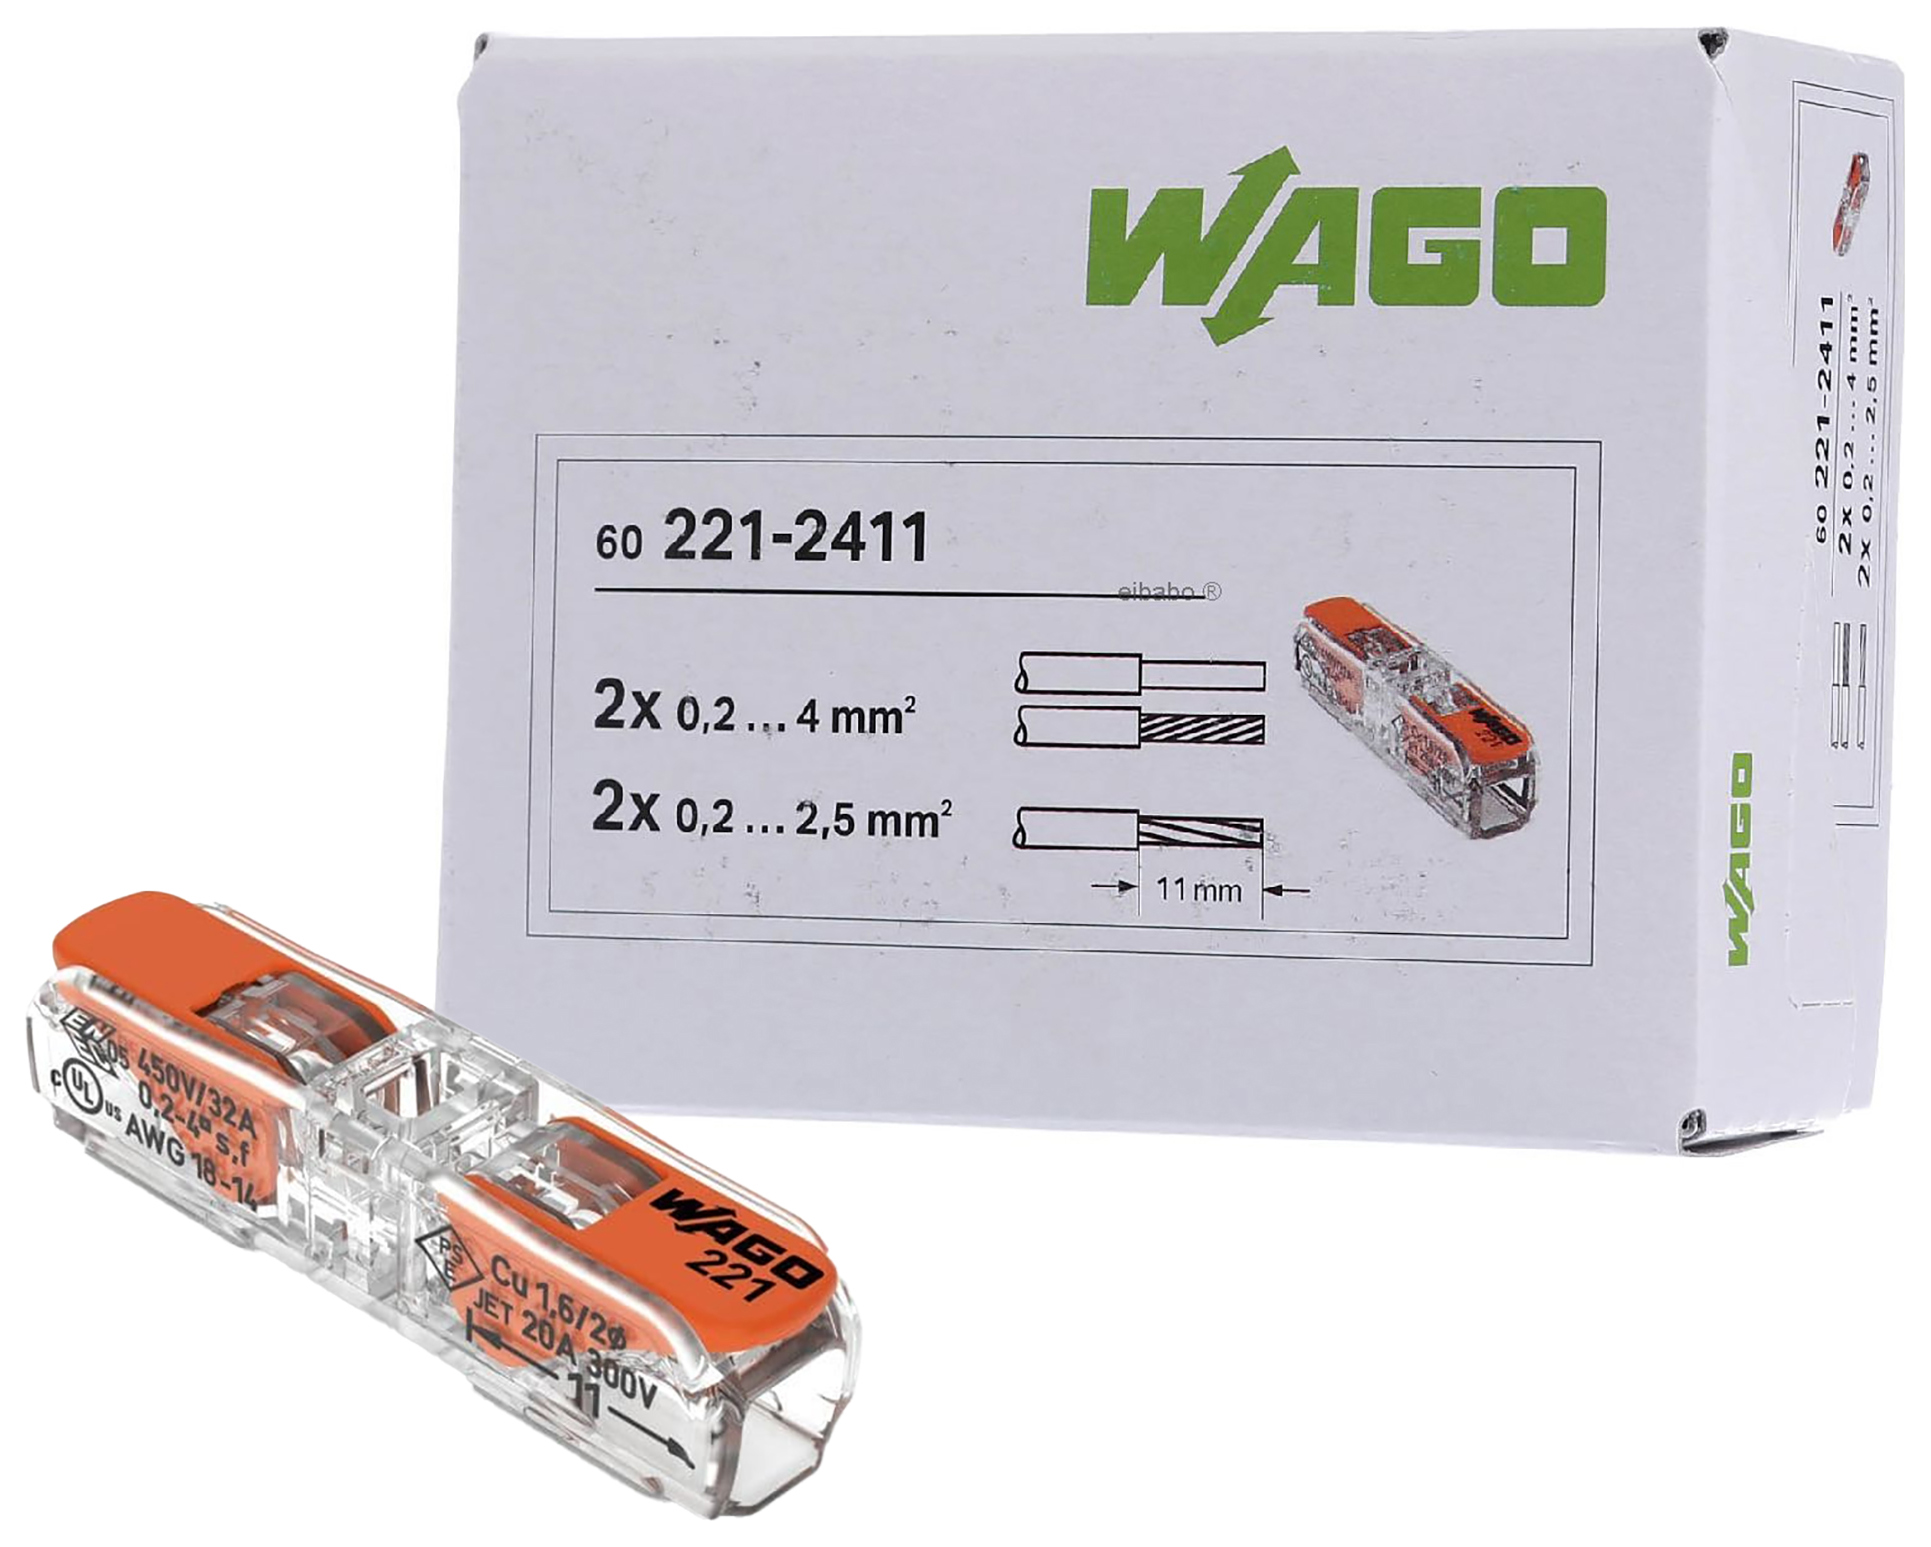 Image of WAGO 221-2411 Inline Connector - Pack of 60